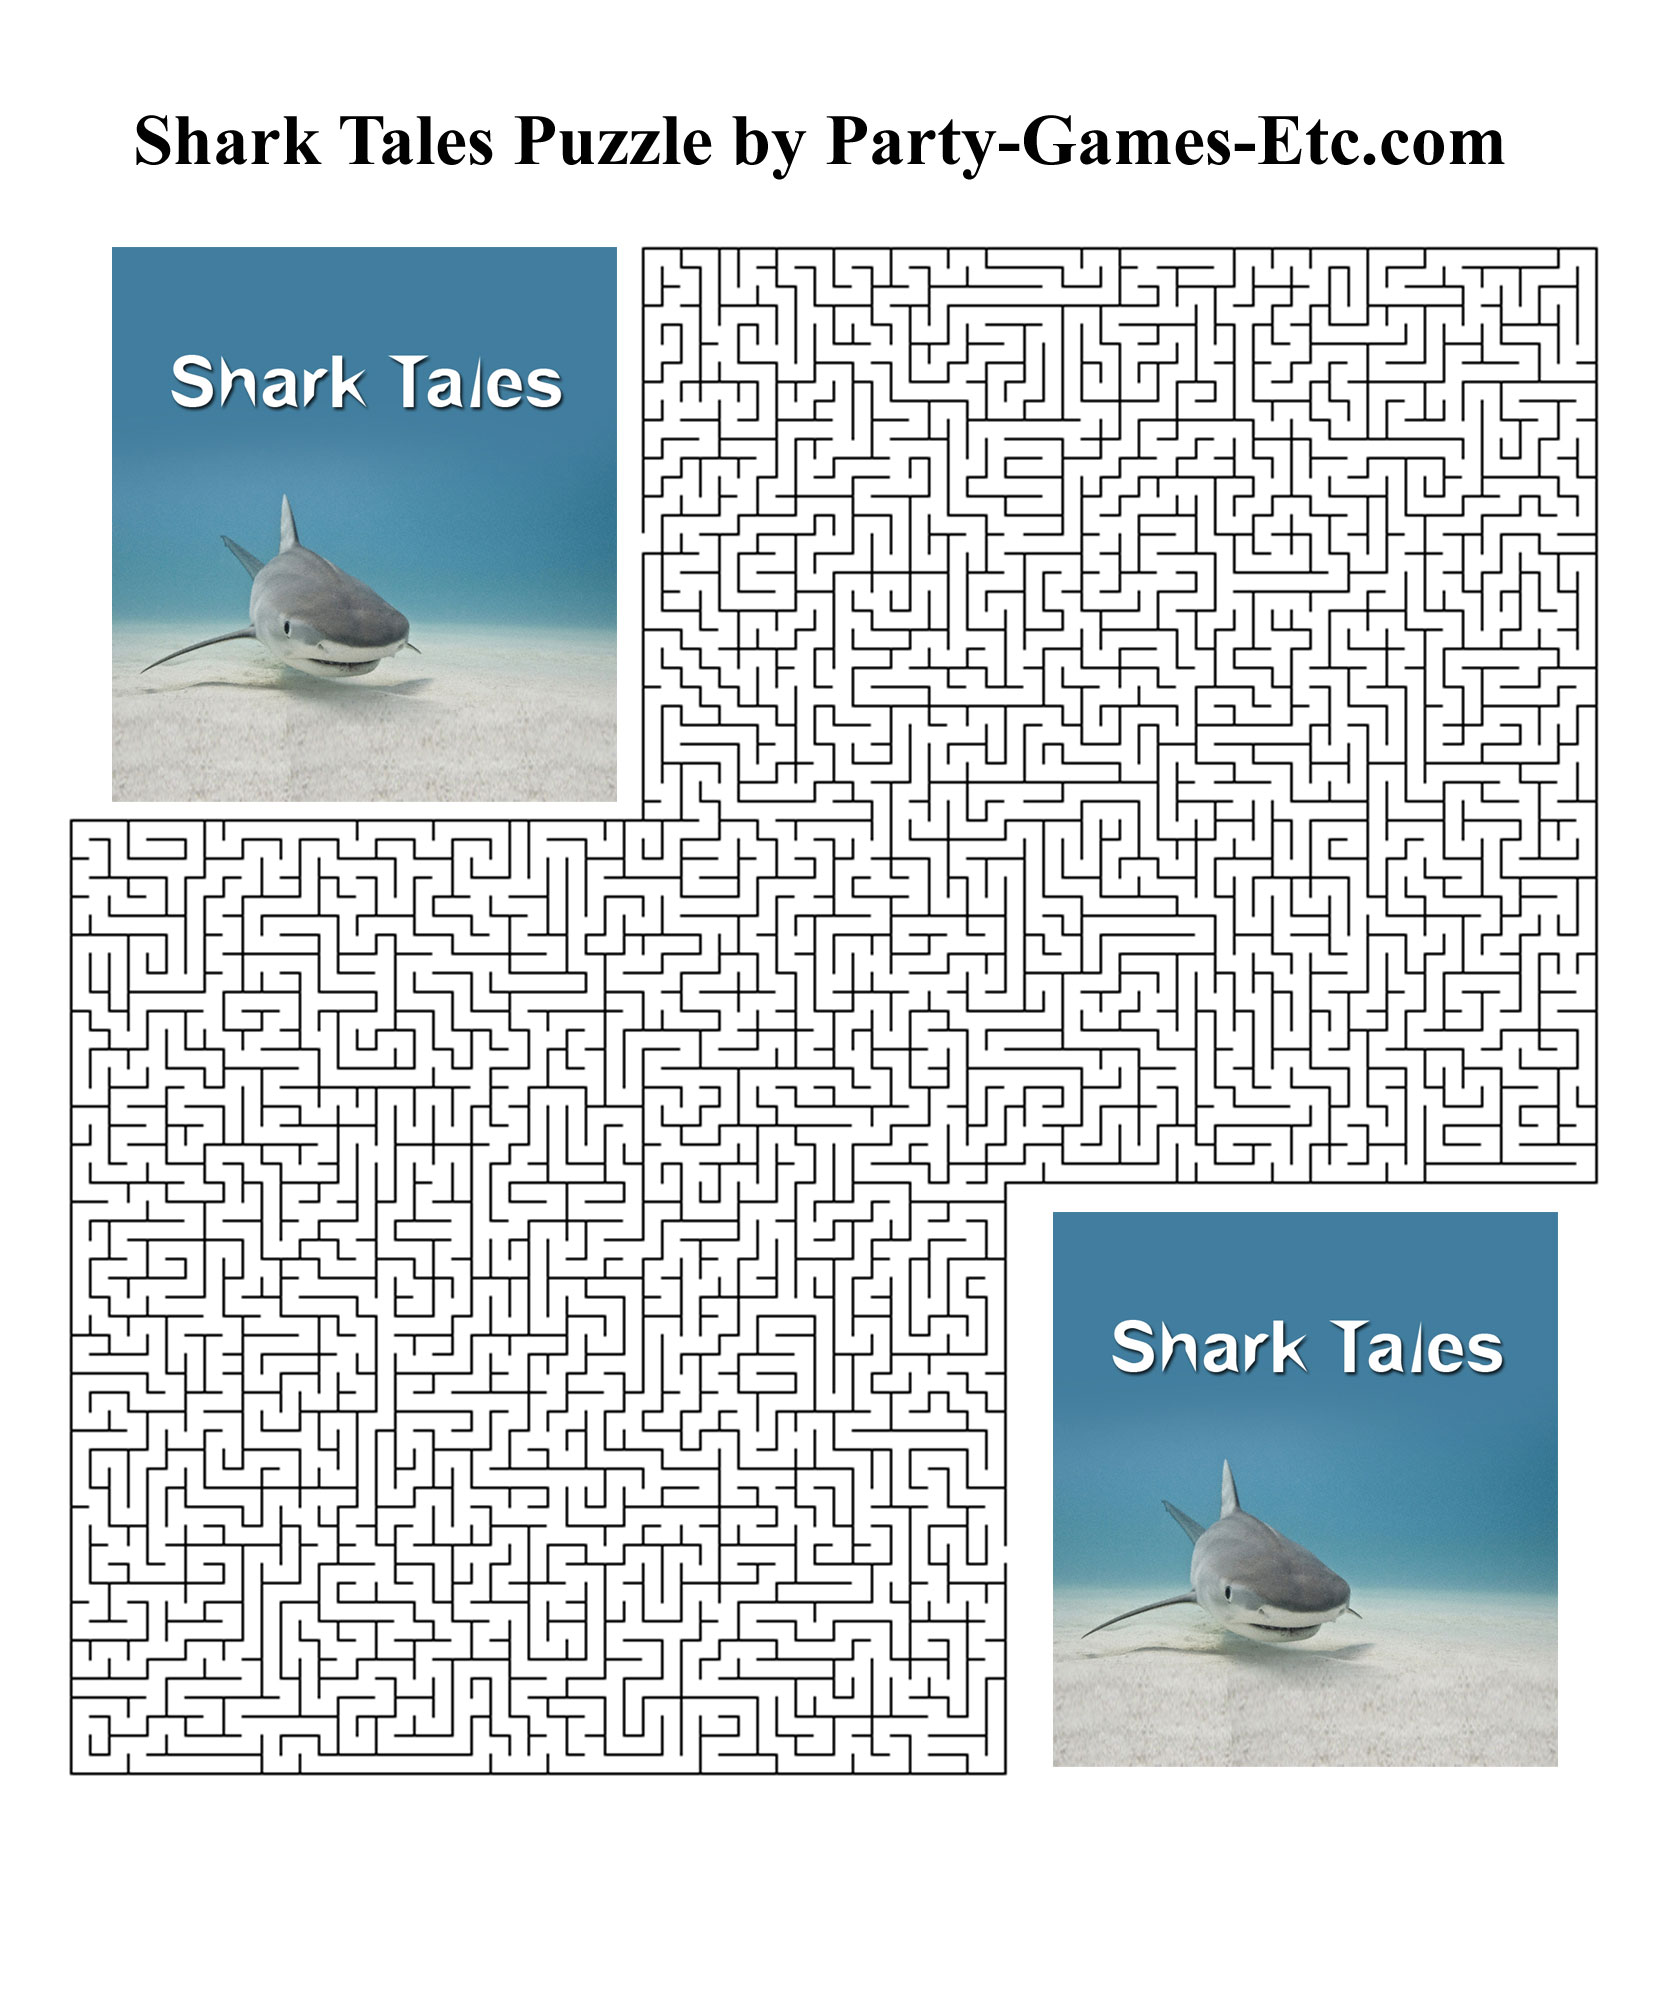 Free Printable Shark Tales Party Game and Pen and Paper Activity